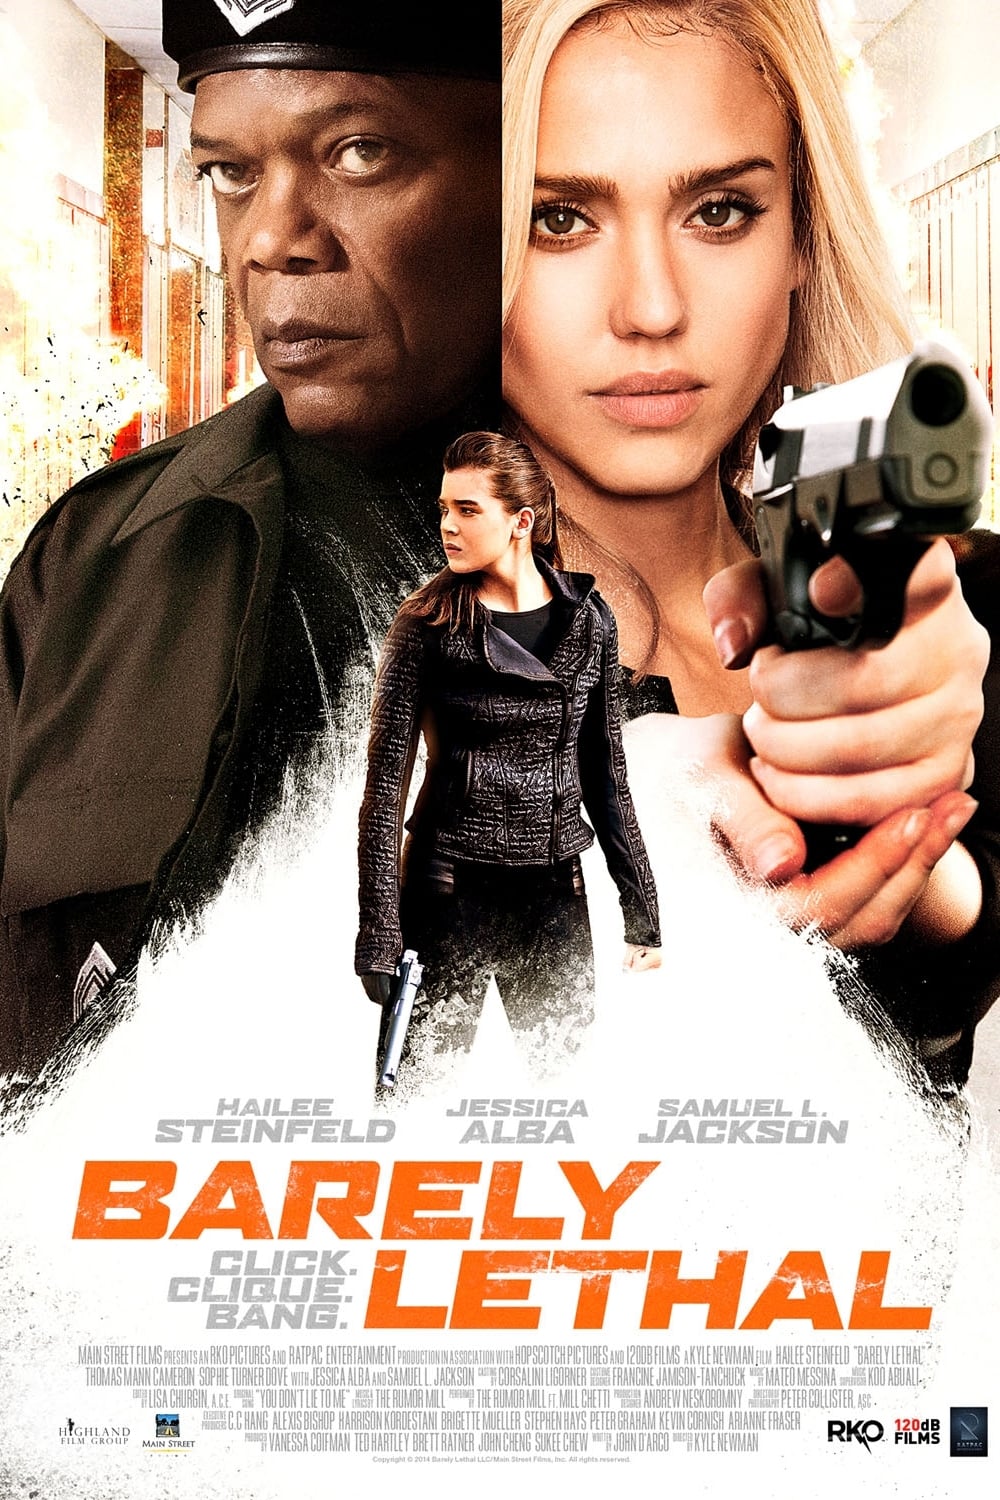 2015 Barely Lethal